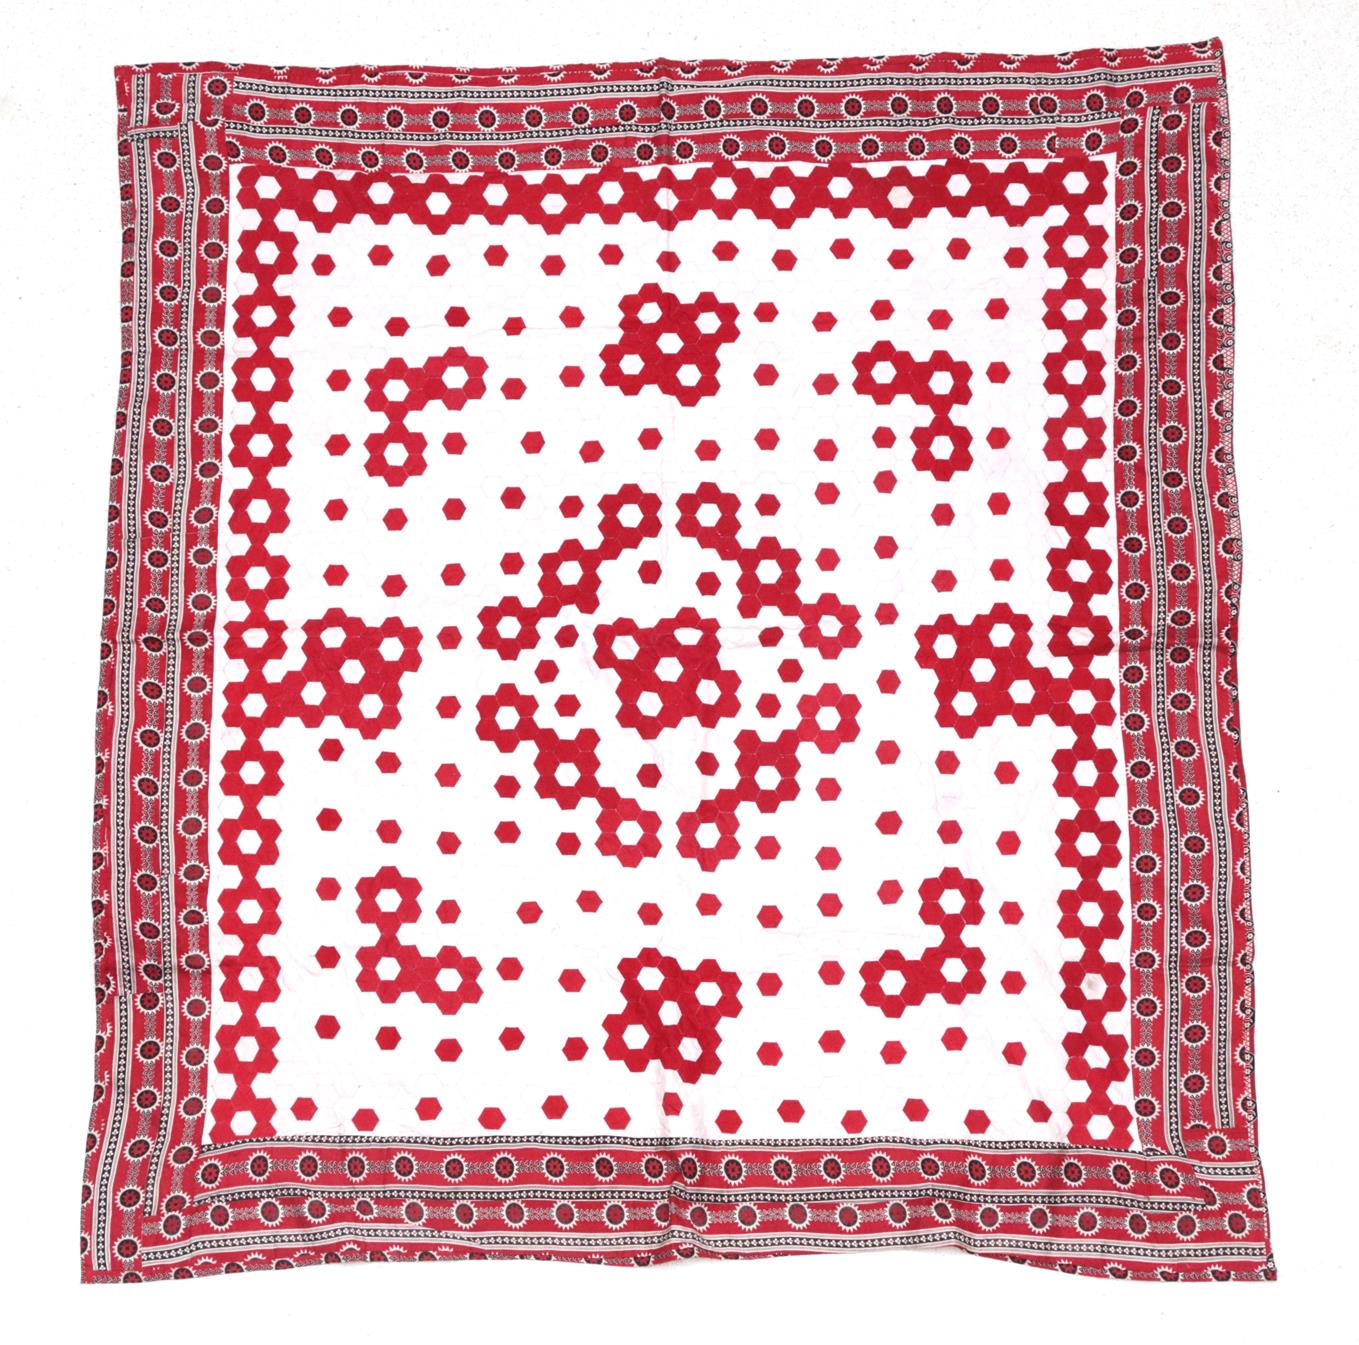 Late 19th Century Red and White Hexagonal Patchwork Quilt, within a red, black and white stripped